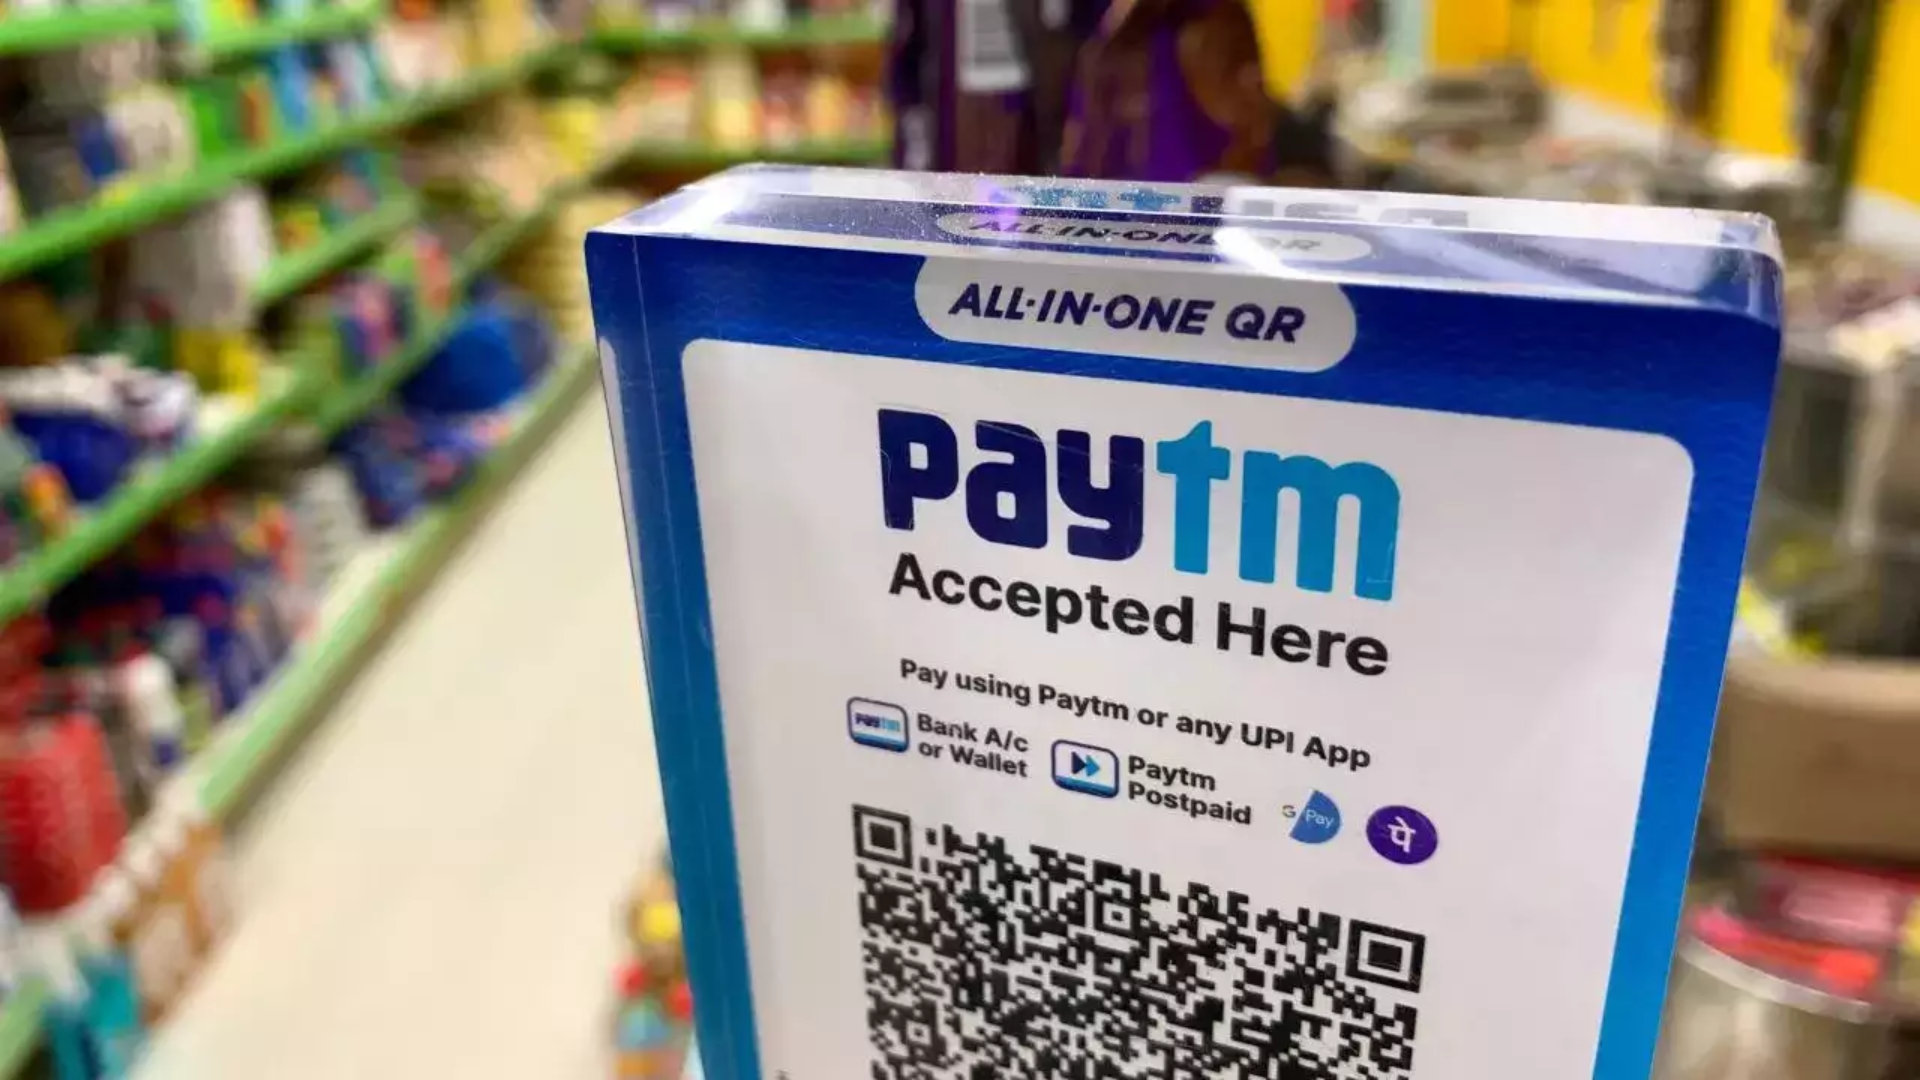 Paytm Shares Surged By 5%, RBI’s Deadline Updated